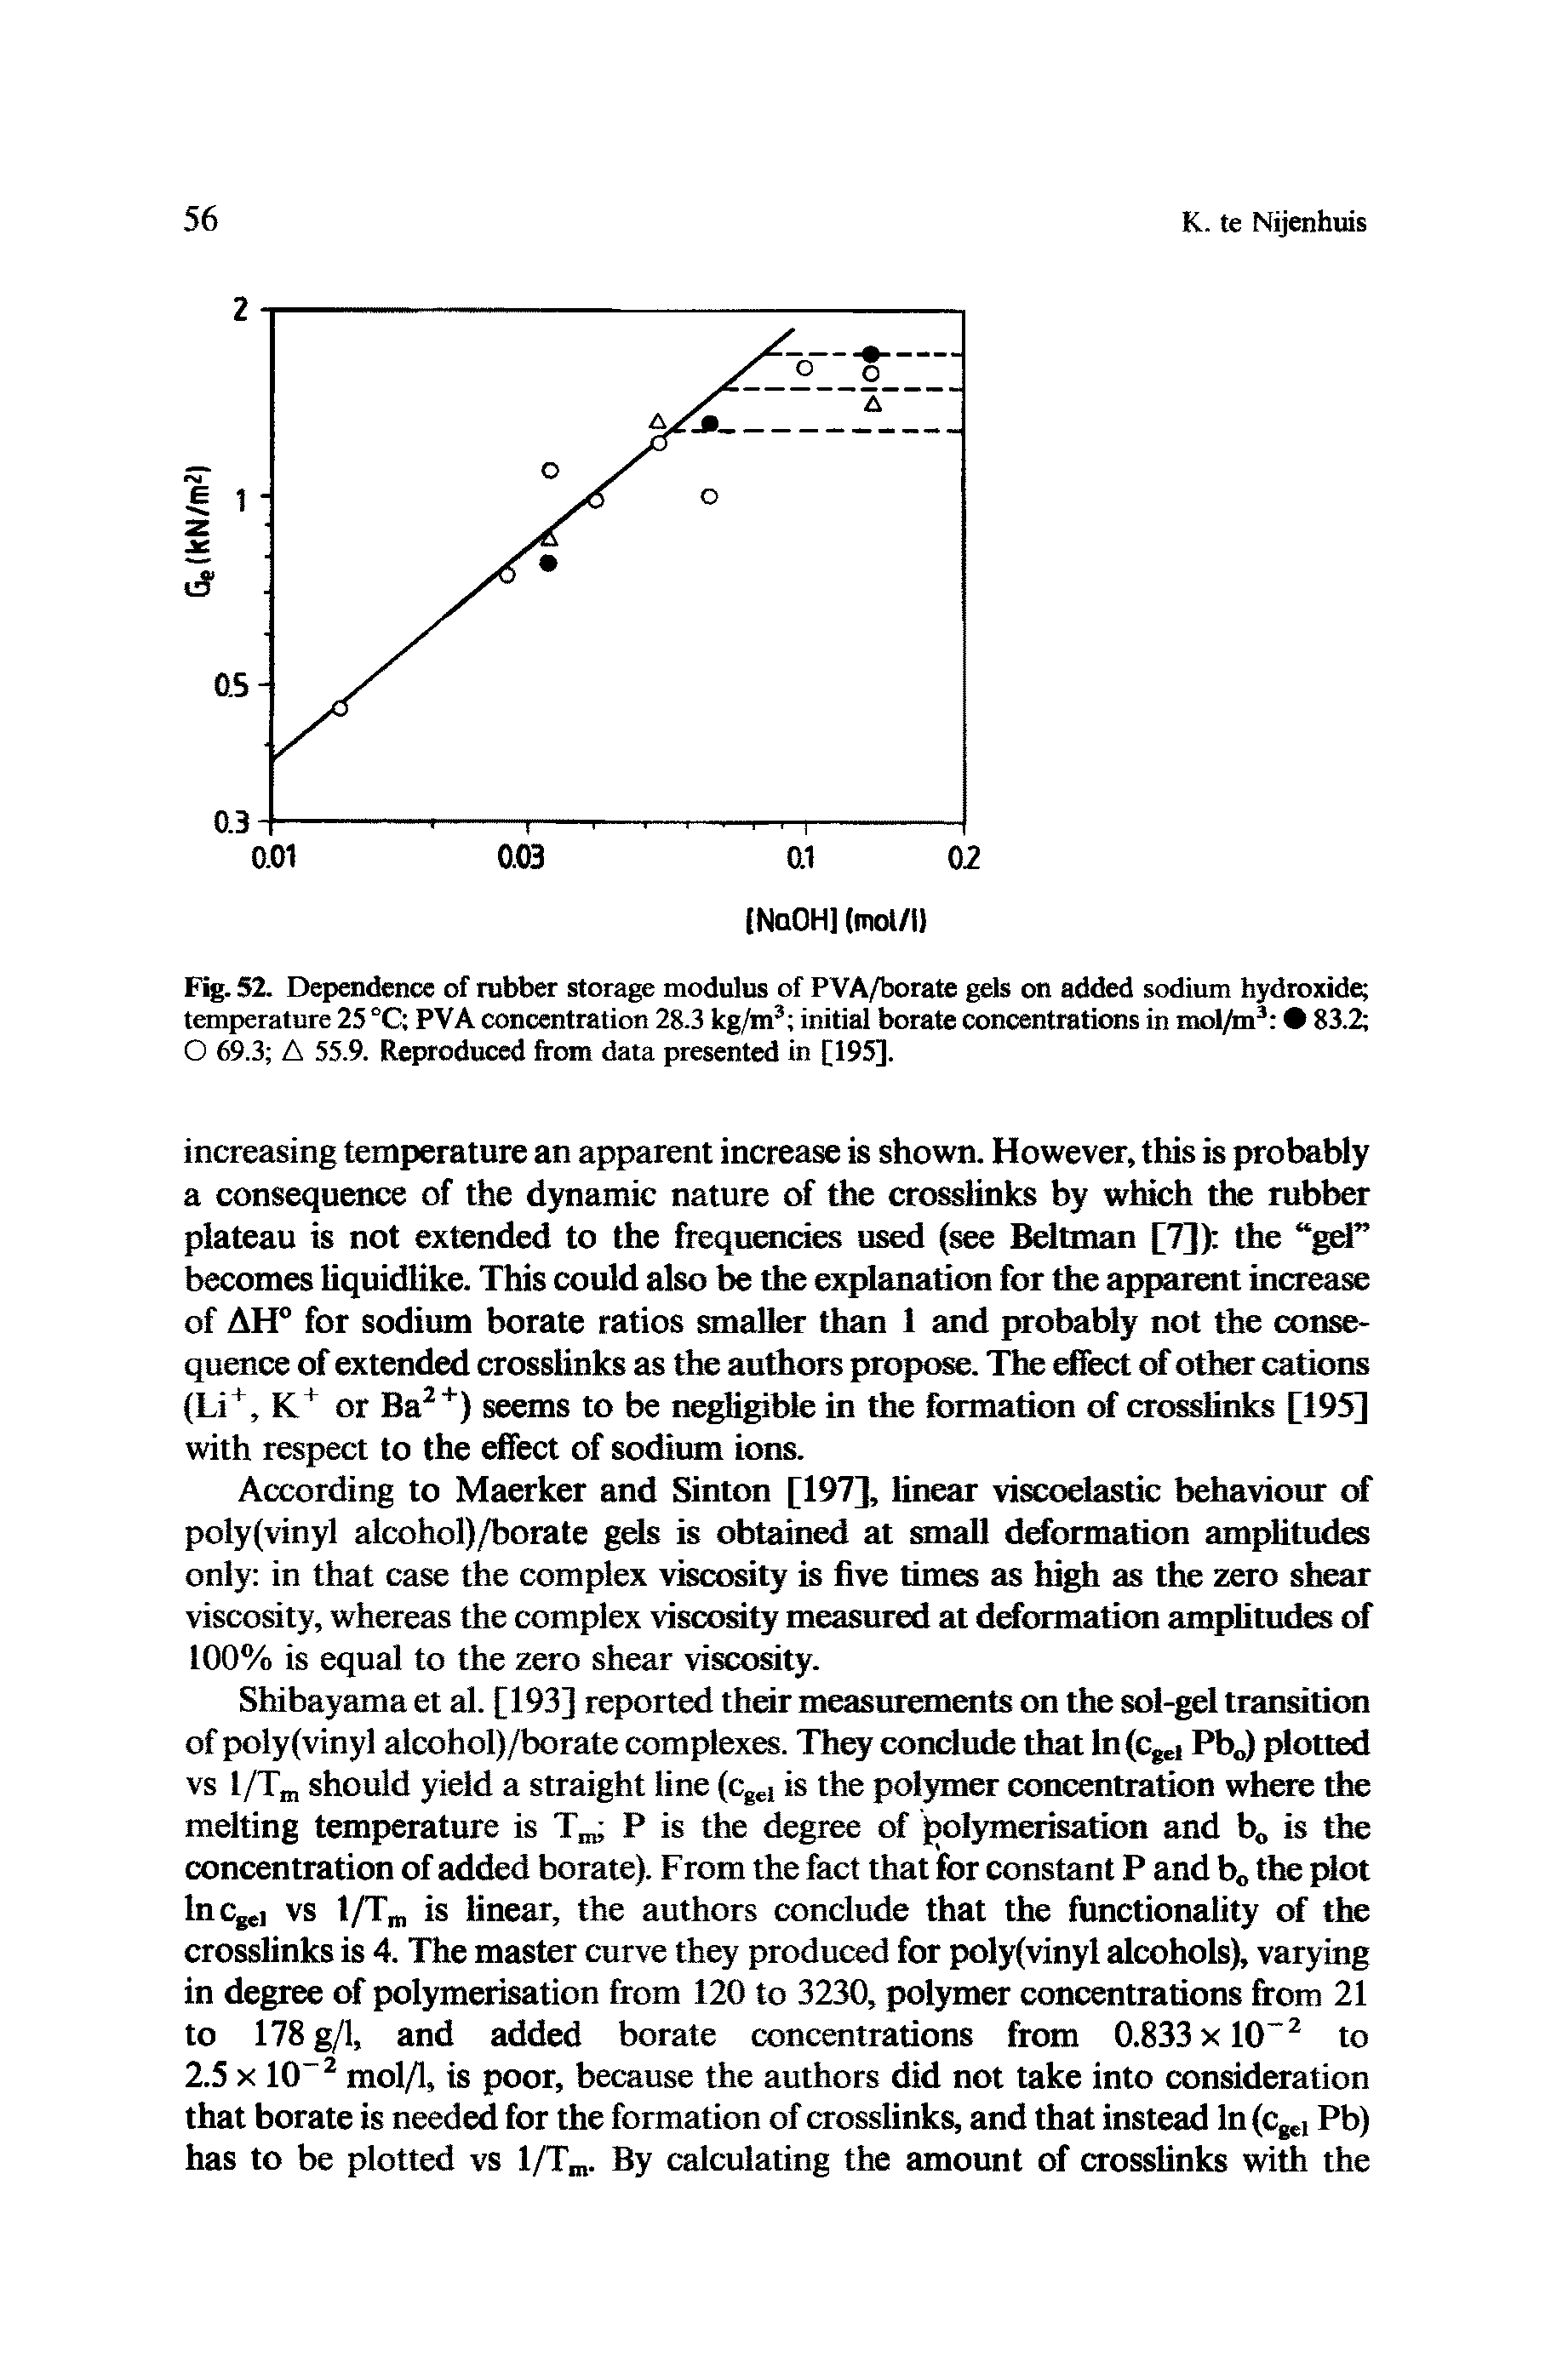 Fig. 52. Dependence of rubber storage modulus of PVA/borate gels on added sodium hydroxide temperature 25 °C PVA concentration 28.3 kg/m initial borate concentrations in mol/m 83.2 O 69.3 A 55.9. Reproduced from data presented in [195].